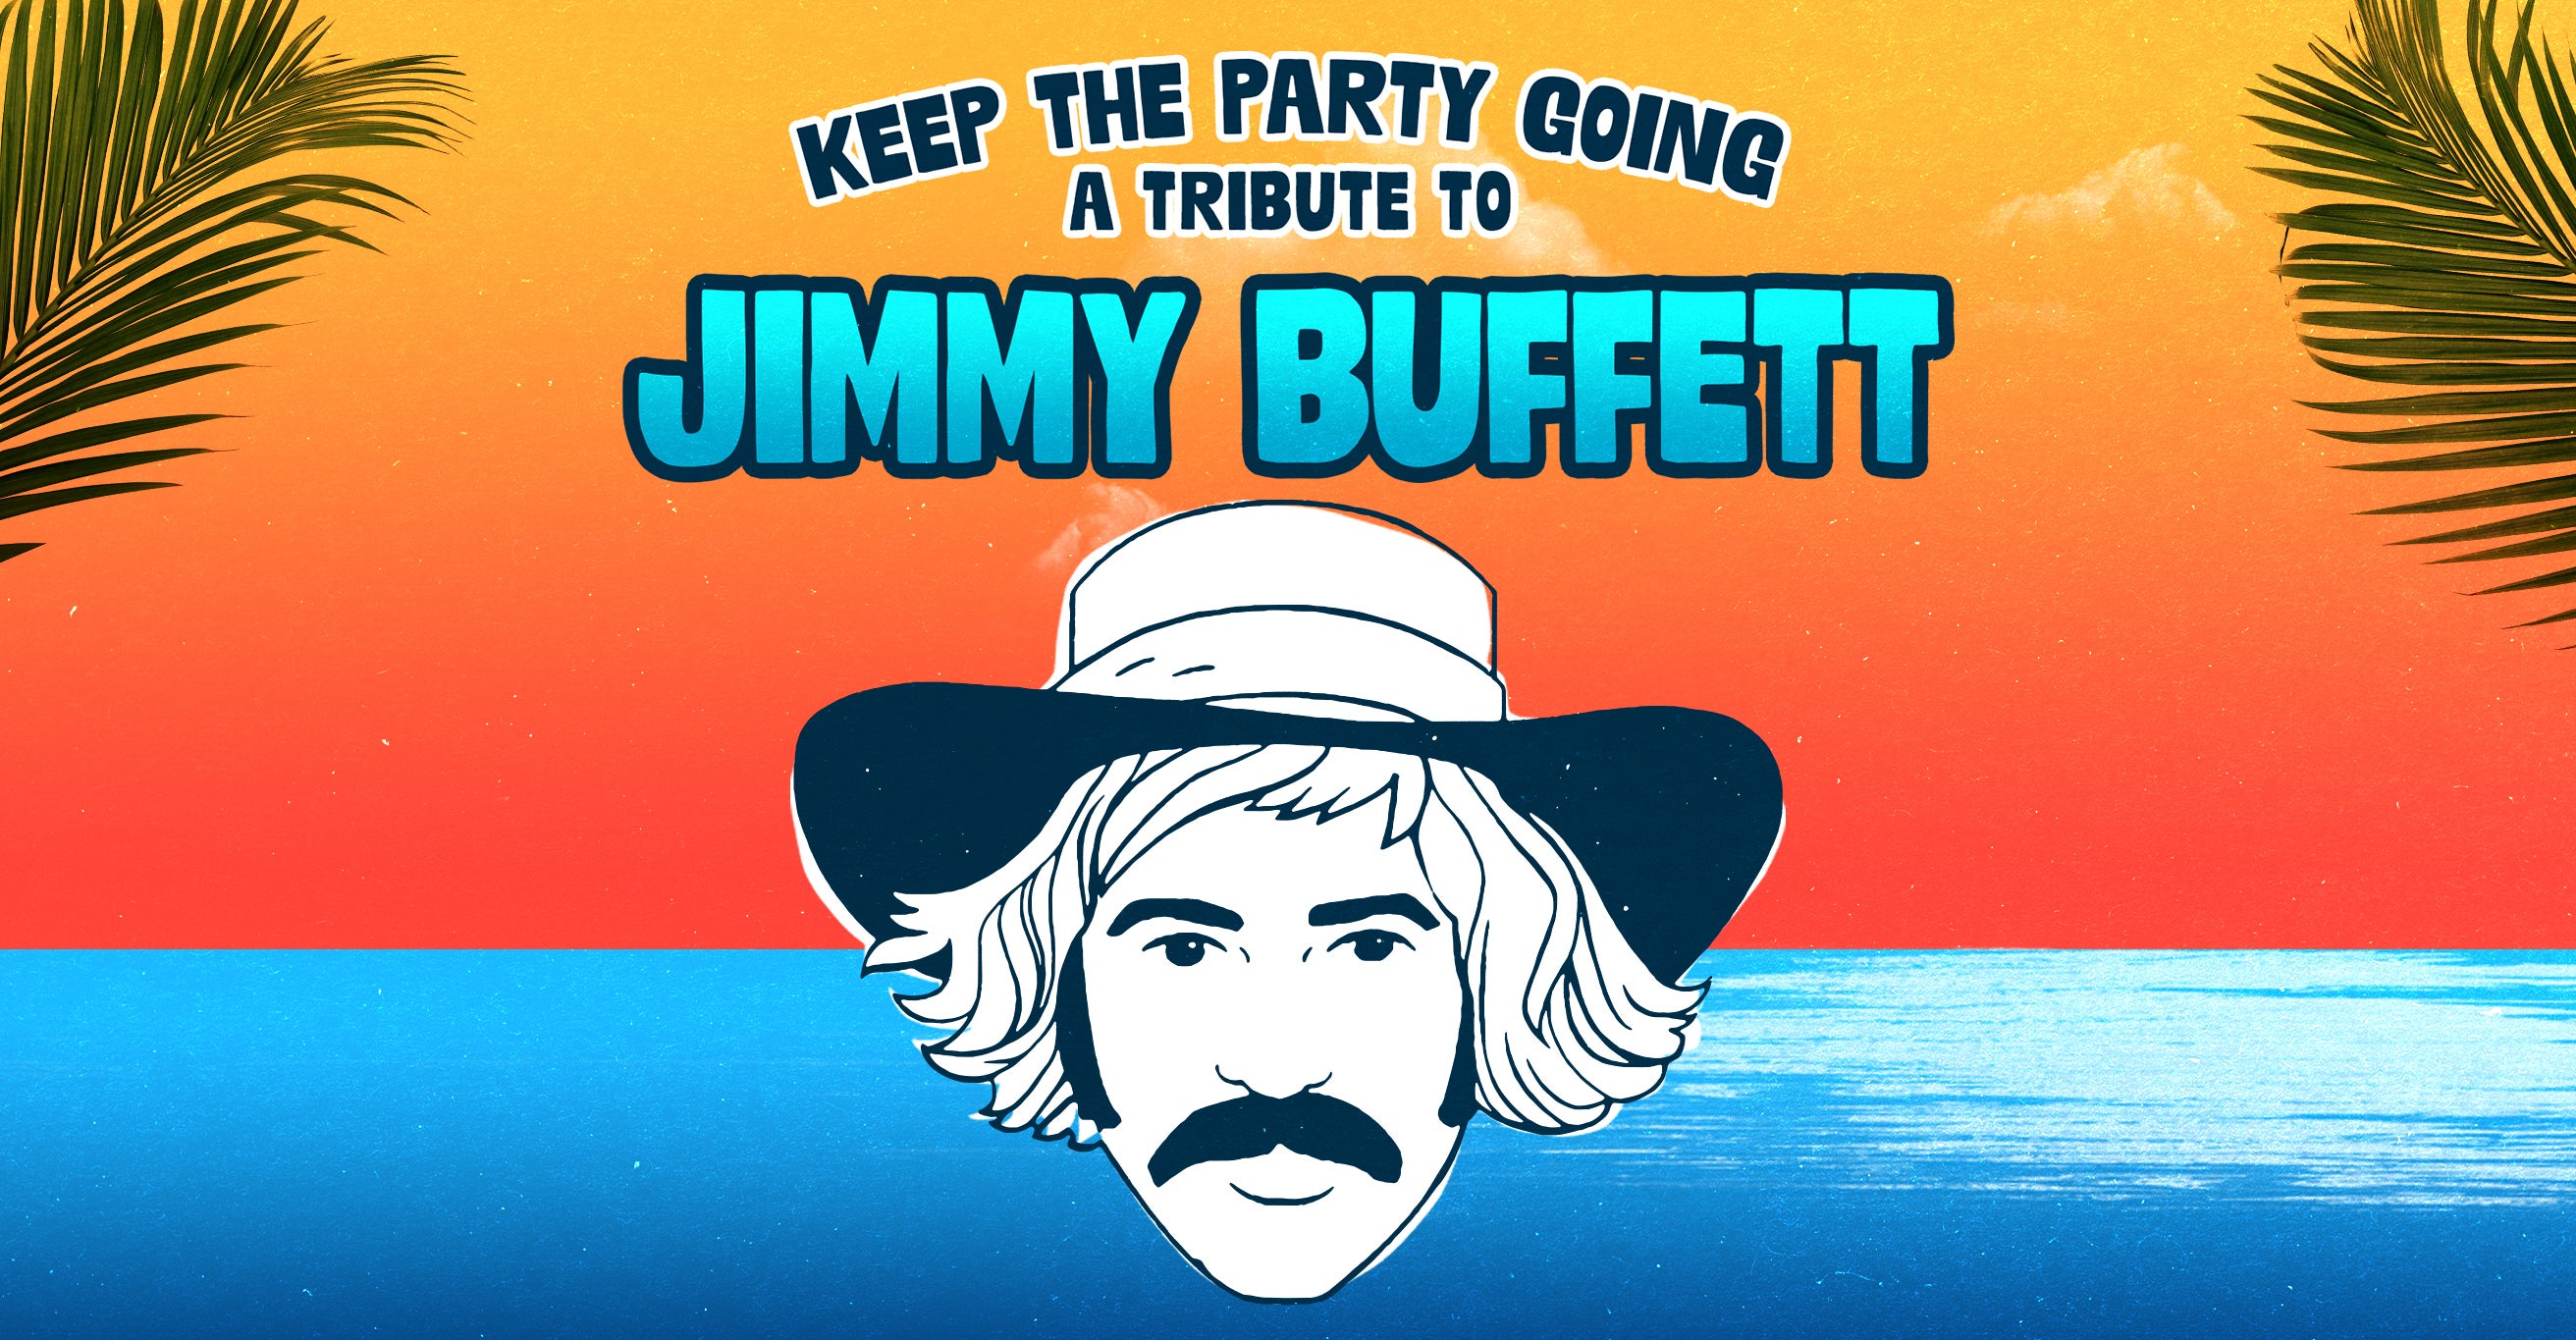 Keep the Party Going: A Tribute to Jimmy Buffett in Hollywood promo photo for American Express® Access presale offer code